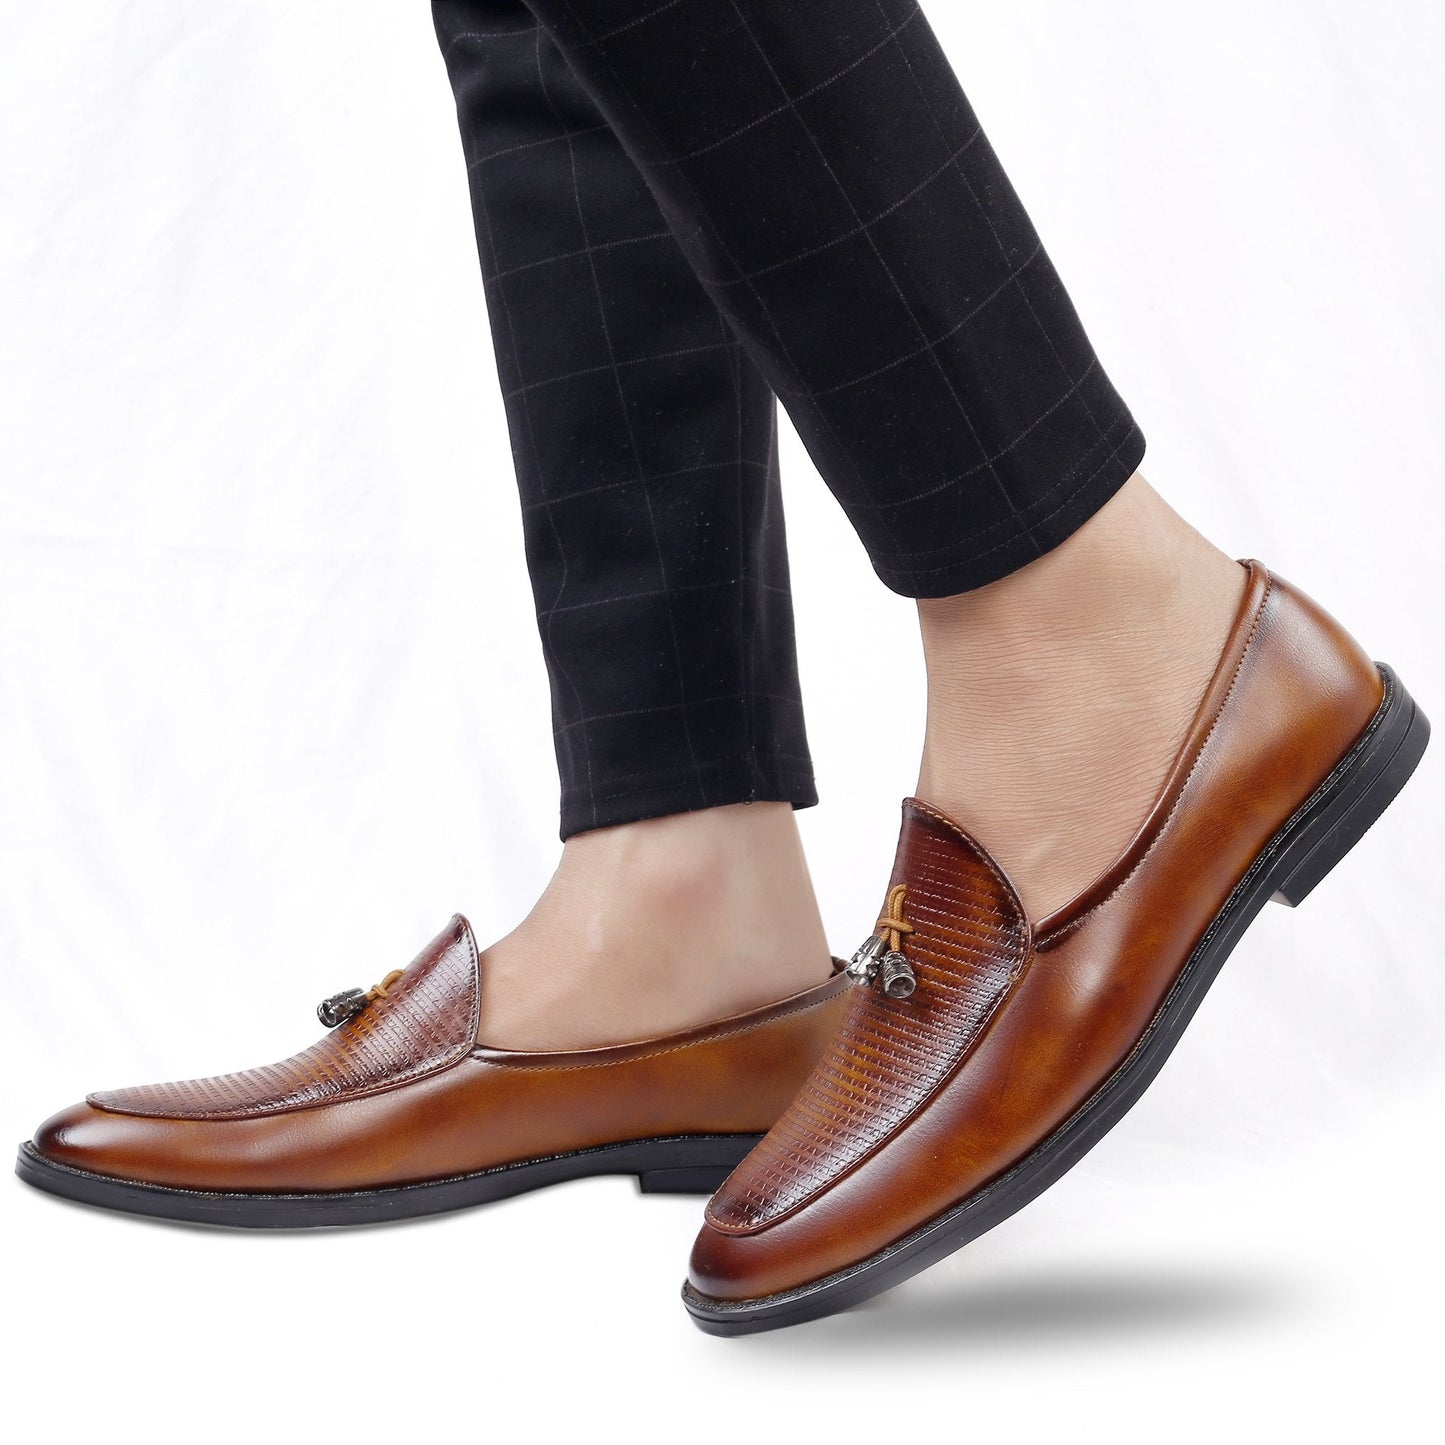 Bxxy's High-end Fashionable Footwear Slip-ons for Men